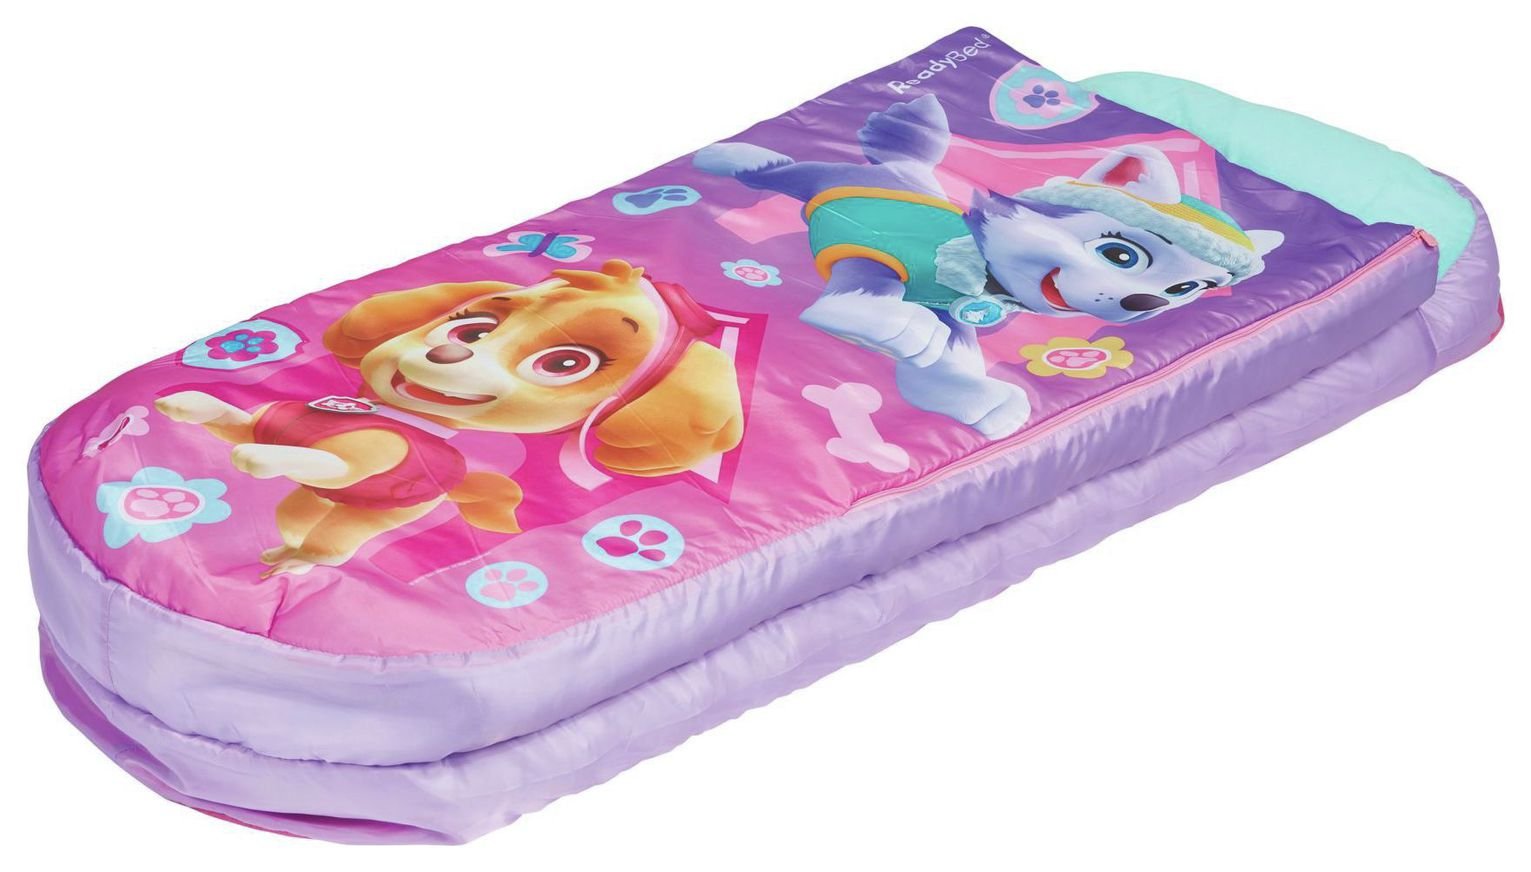 PAW Patrol Junior ReadyBed Air Bed and Sleeping Bag review